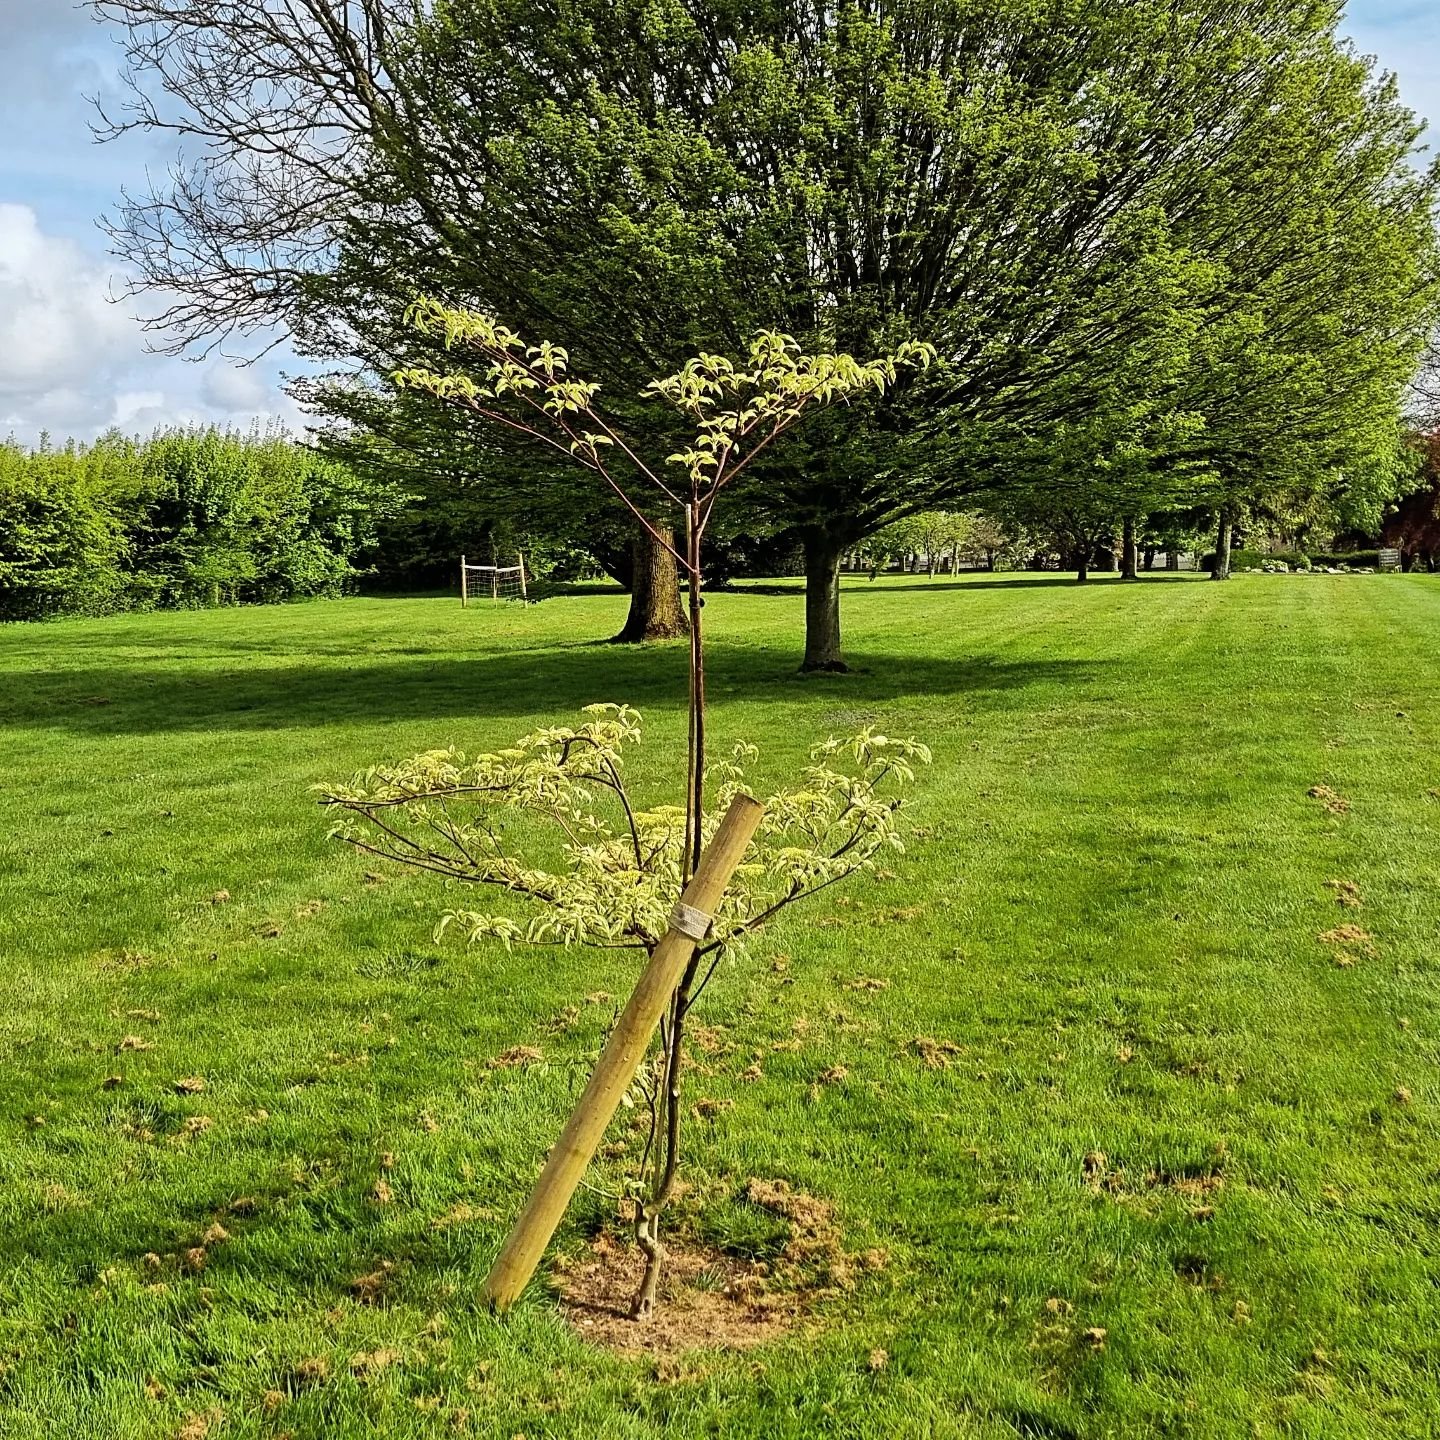 New trees growing well in the park. If I can remember them all in the right order: 
Wedding cake tree, Giant sequoia, Foxglove tree, Weeping purple beech, Scots pine, Japanese maple, Handkerchief tree (will flower in 10 years!), Eucalyptus, Black loc